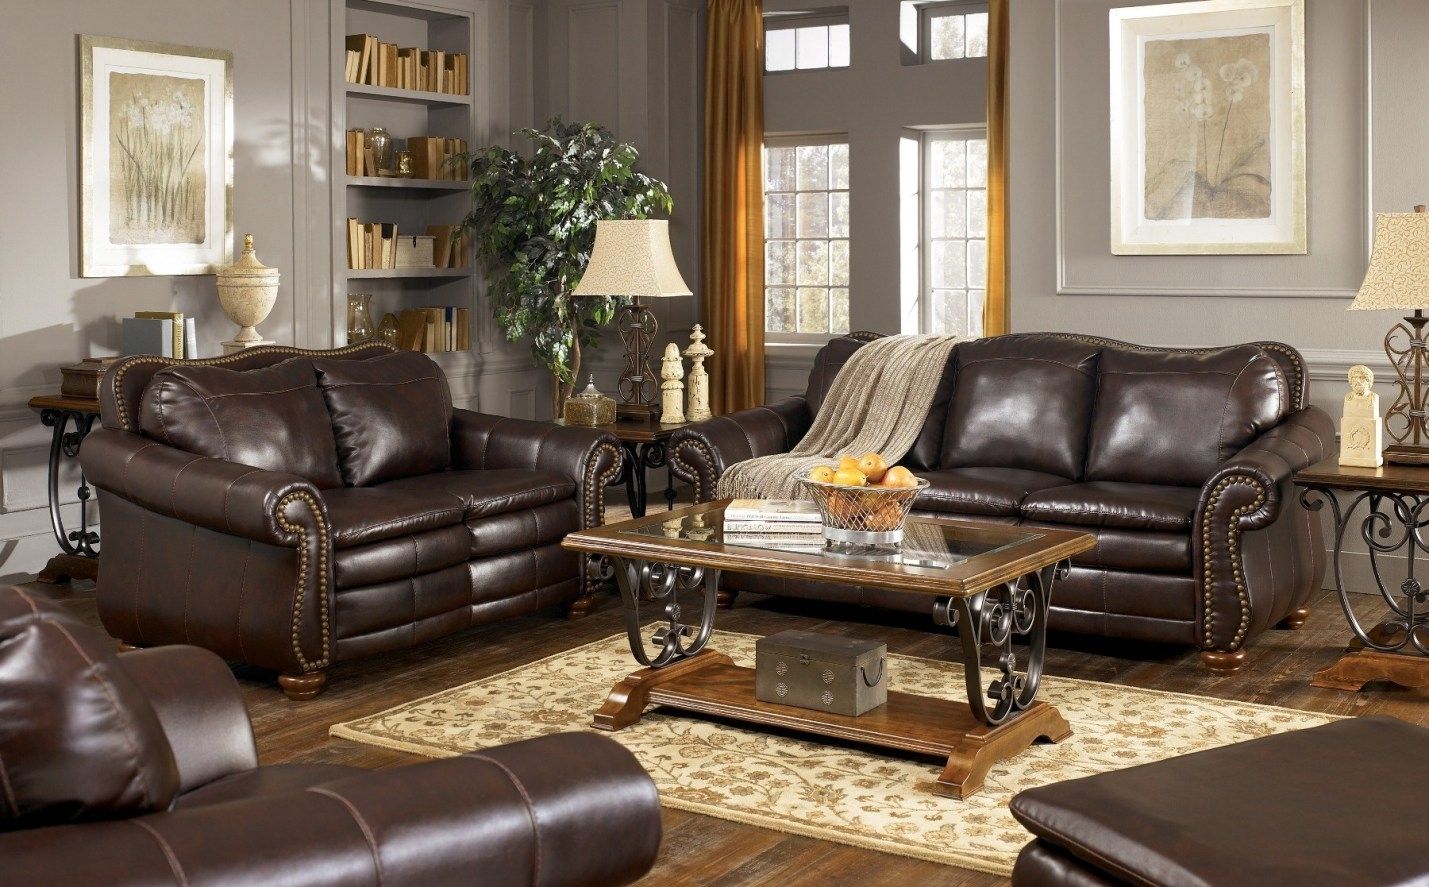 Furniture : Rustic Furniture Lubbock Playful Western Sofas For Sale Regarding Lubbock Sectional Sofas (View 3 of 10)